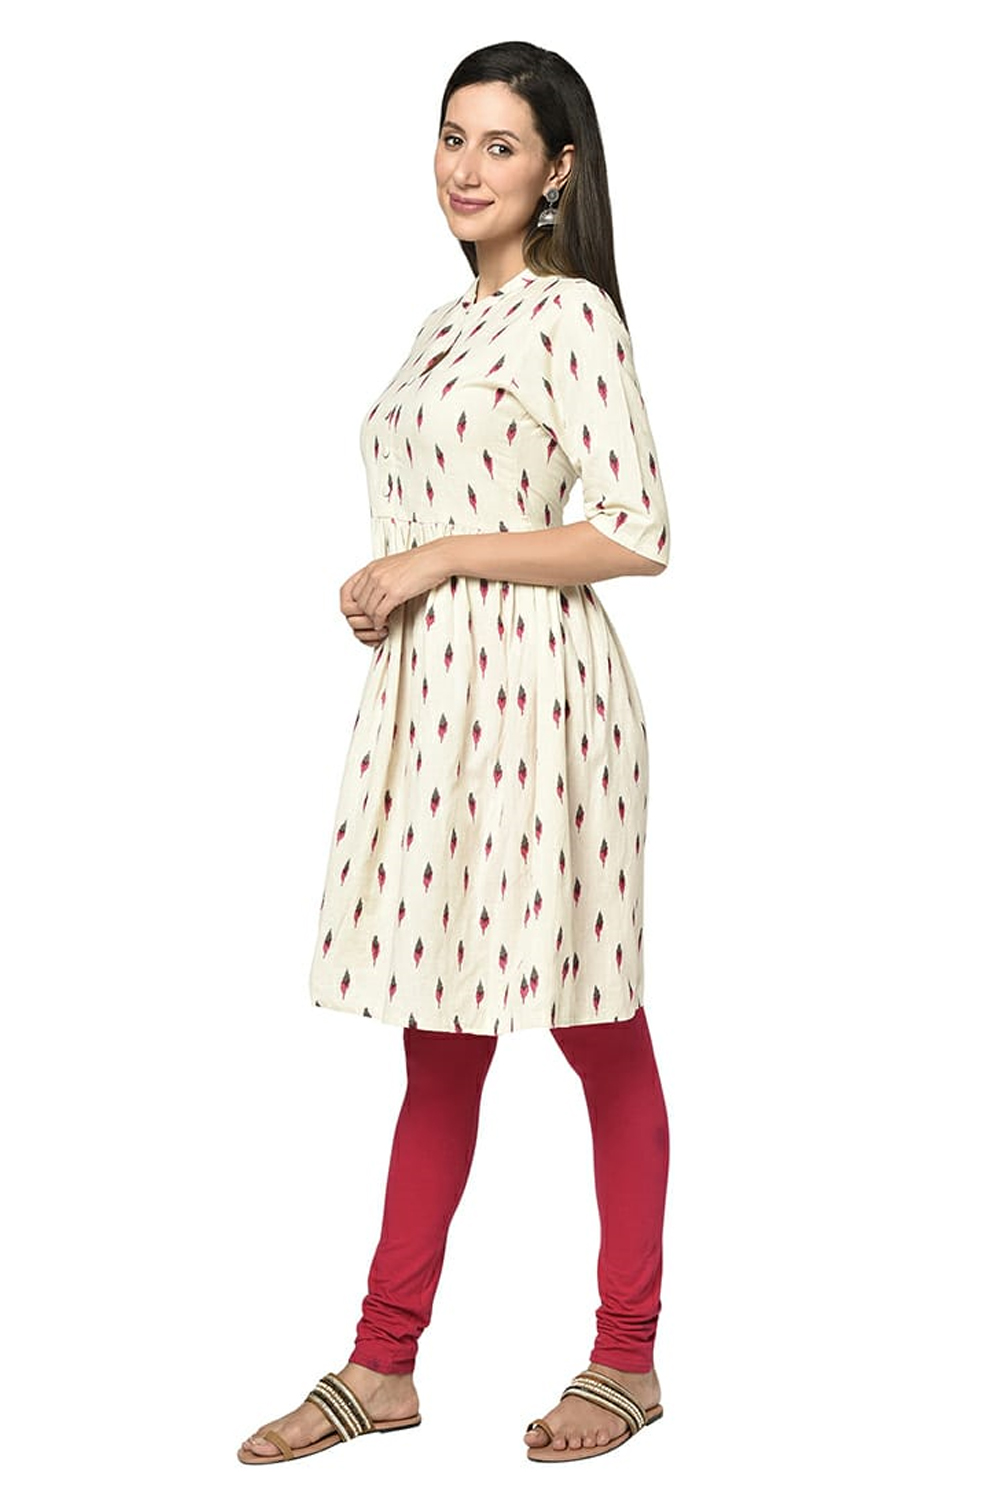 Stylish-and-comfortable-cream-color-Ikkat-cotton-frock-style-kurti